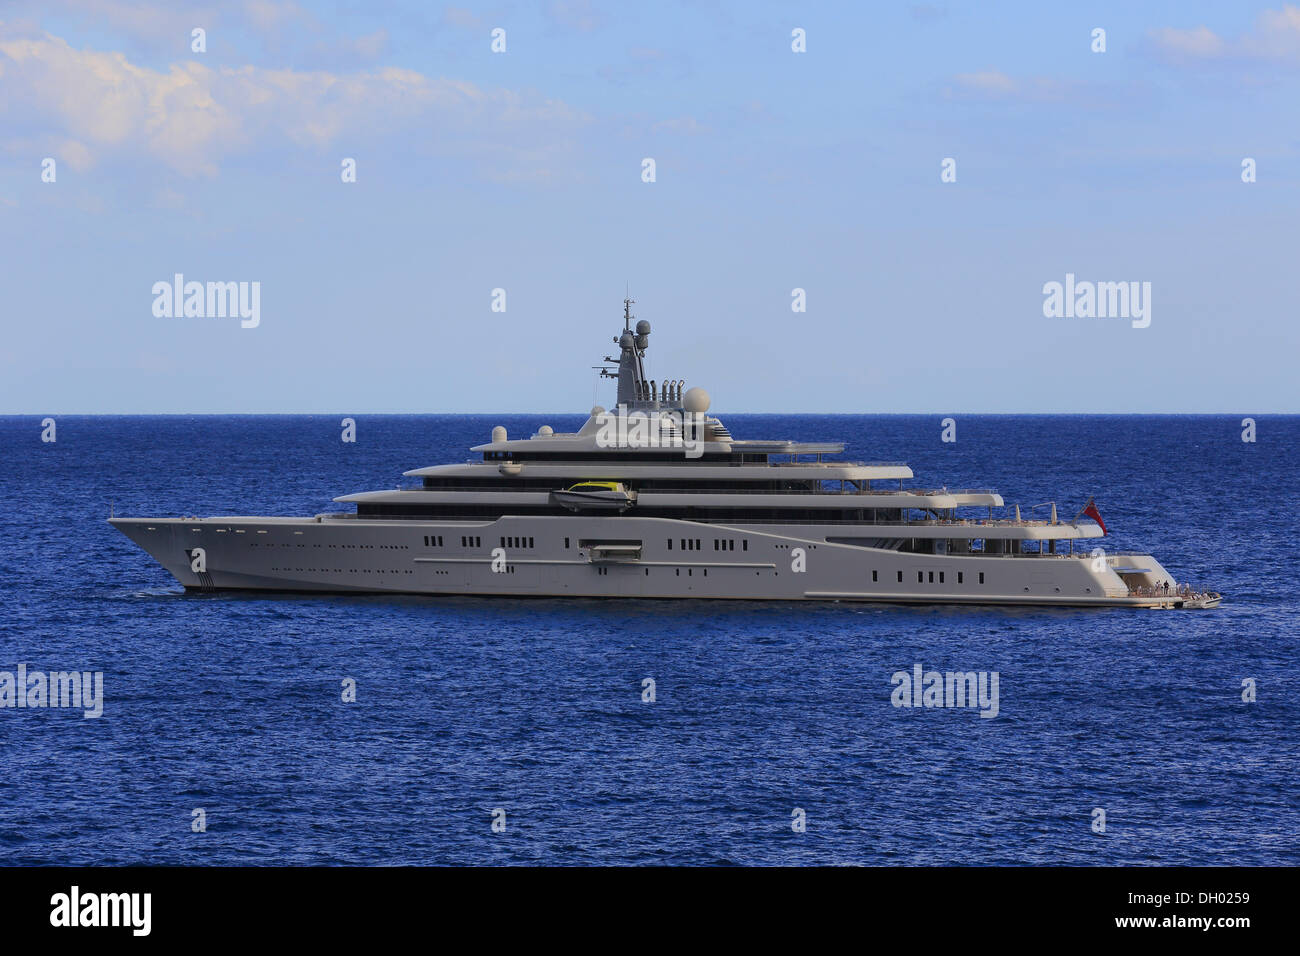 Eclipse, a cruiser built by Blohm and Voss, length 162.5 meters, built in 2010, French Riviera, France, Mediterranean Sea Stock Photo